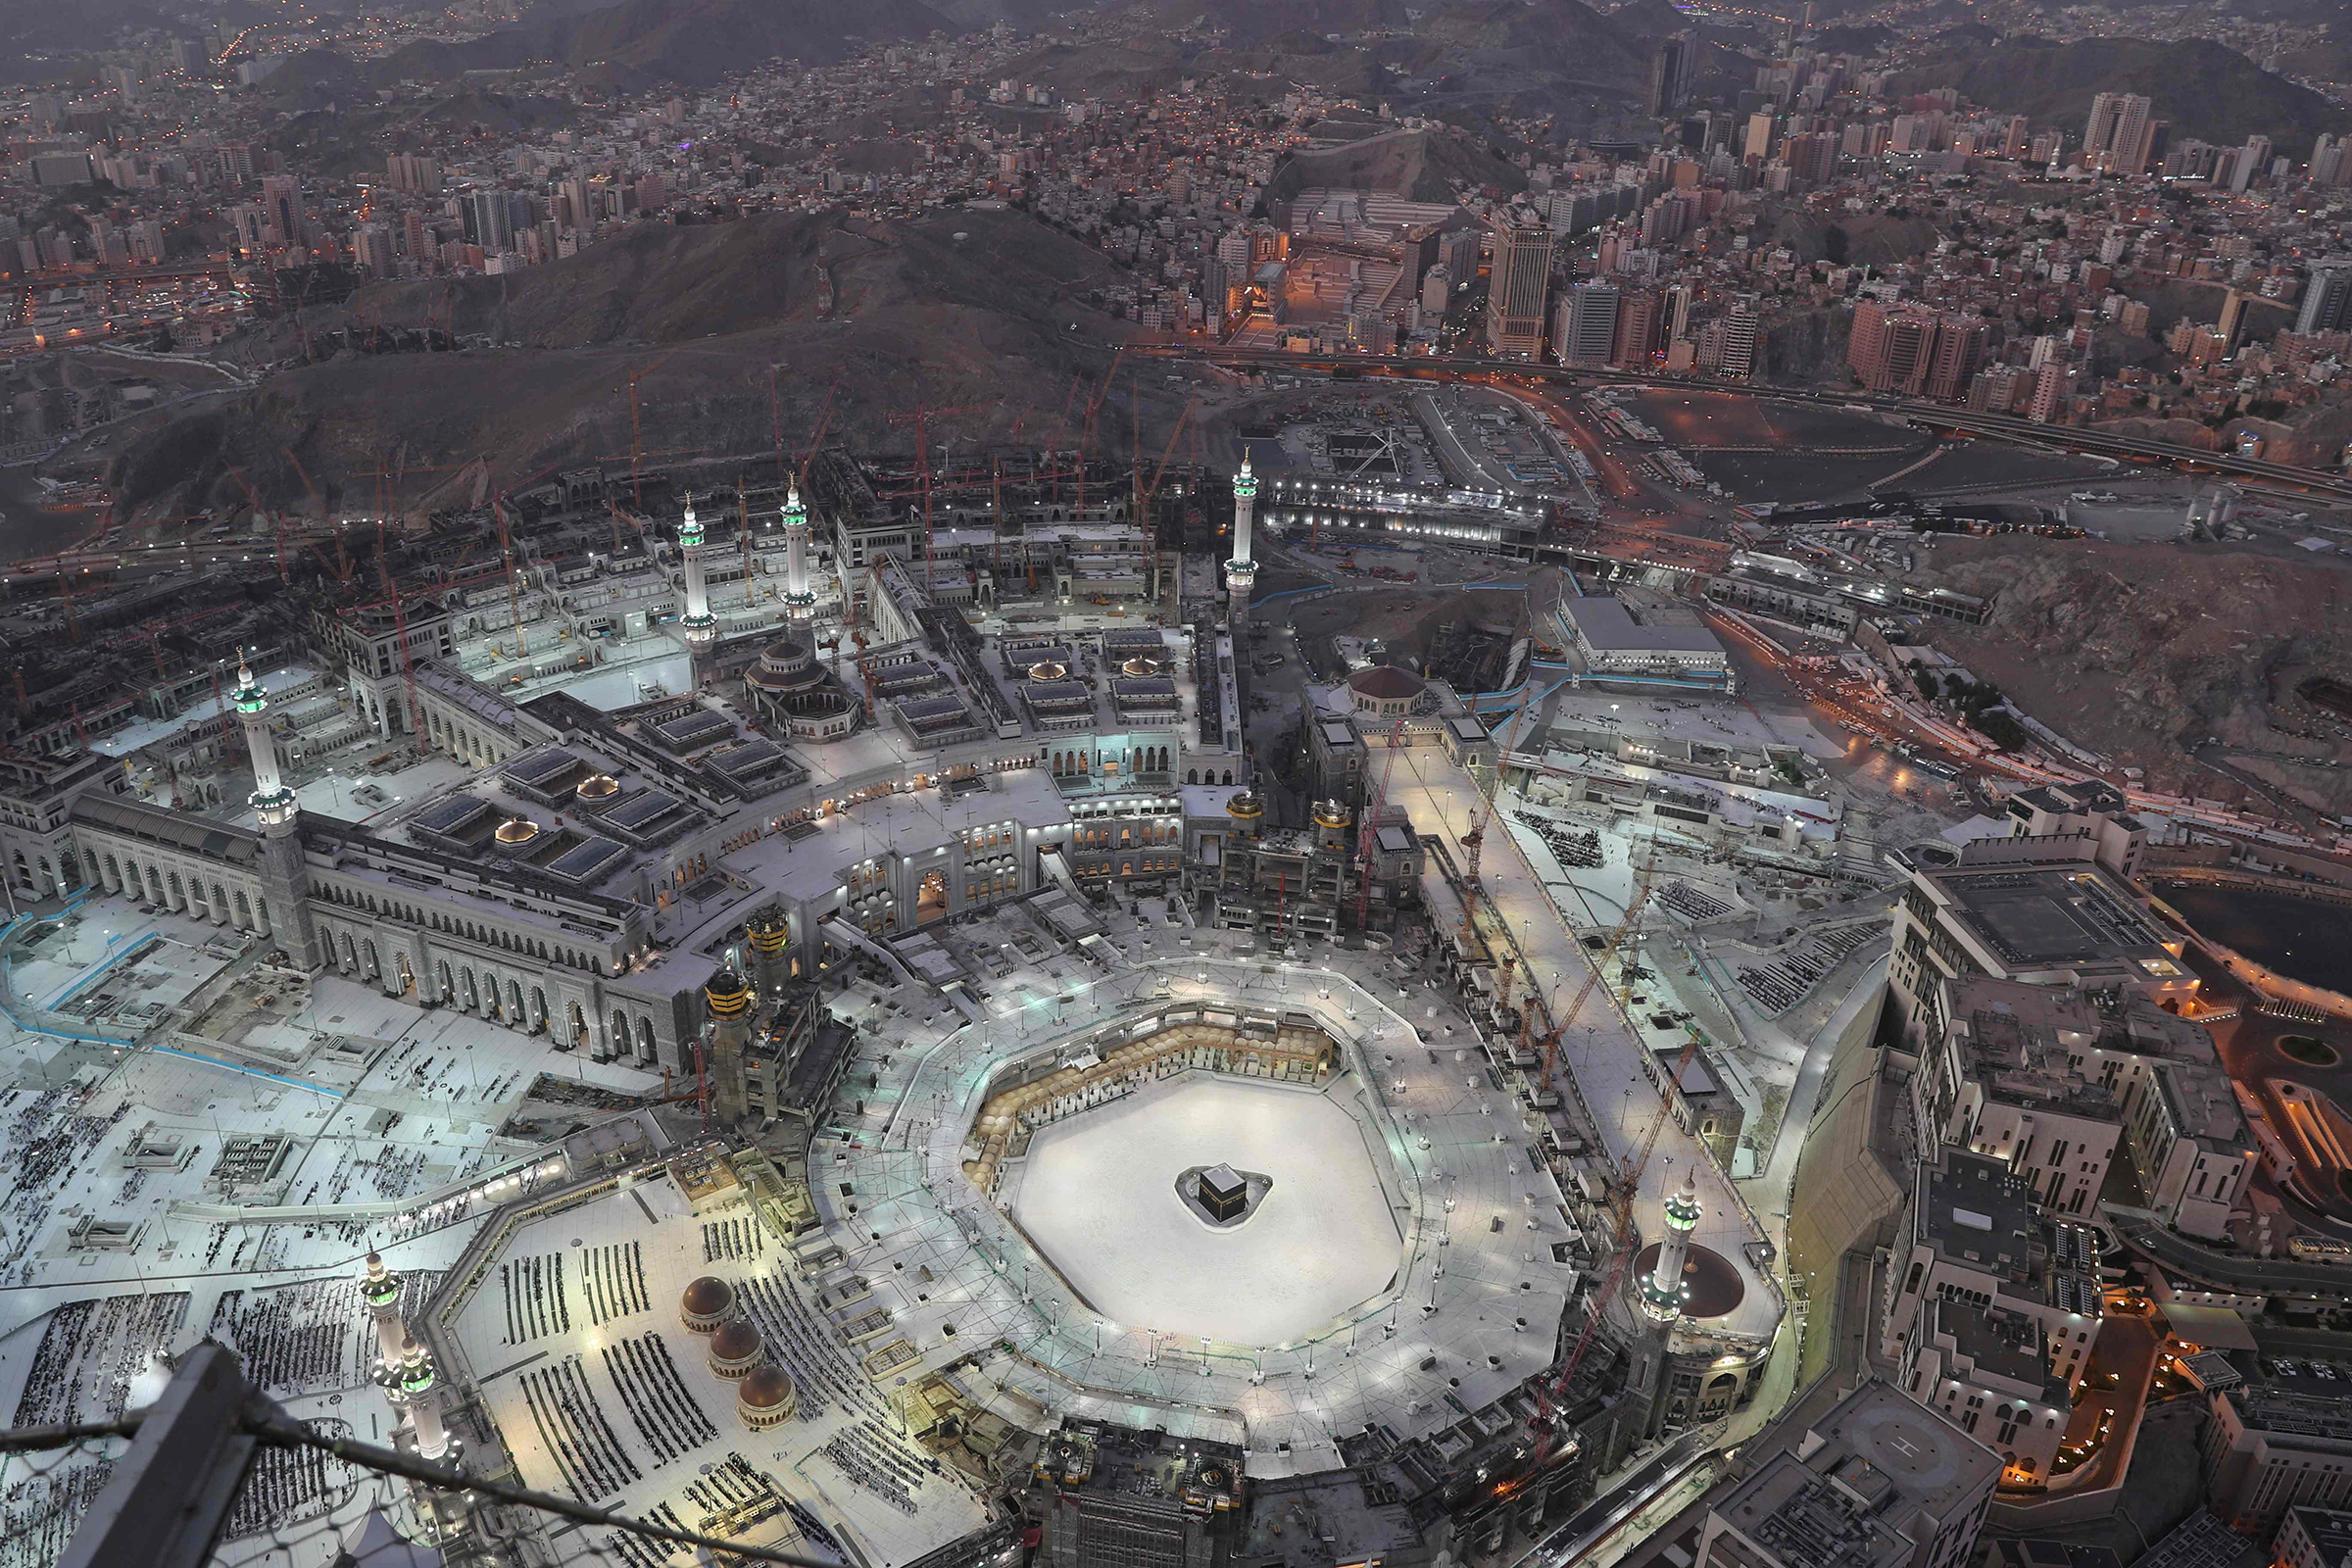 An eerie emptiness enveloped the area surrounding the Kaaba in Mecca's Grand Mosque, Islam's holiest site, on March 6, as attendance at Friday prayers was hit by measures to protect against COVID-19. (Bandar al-Dandani—AFP/Getty Images)